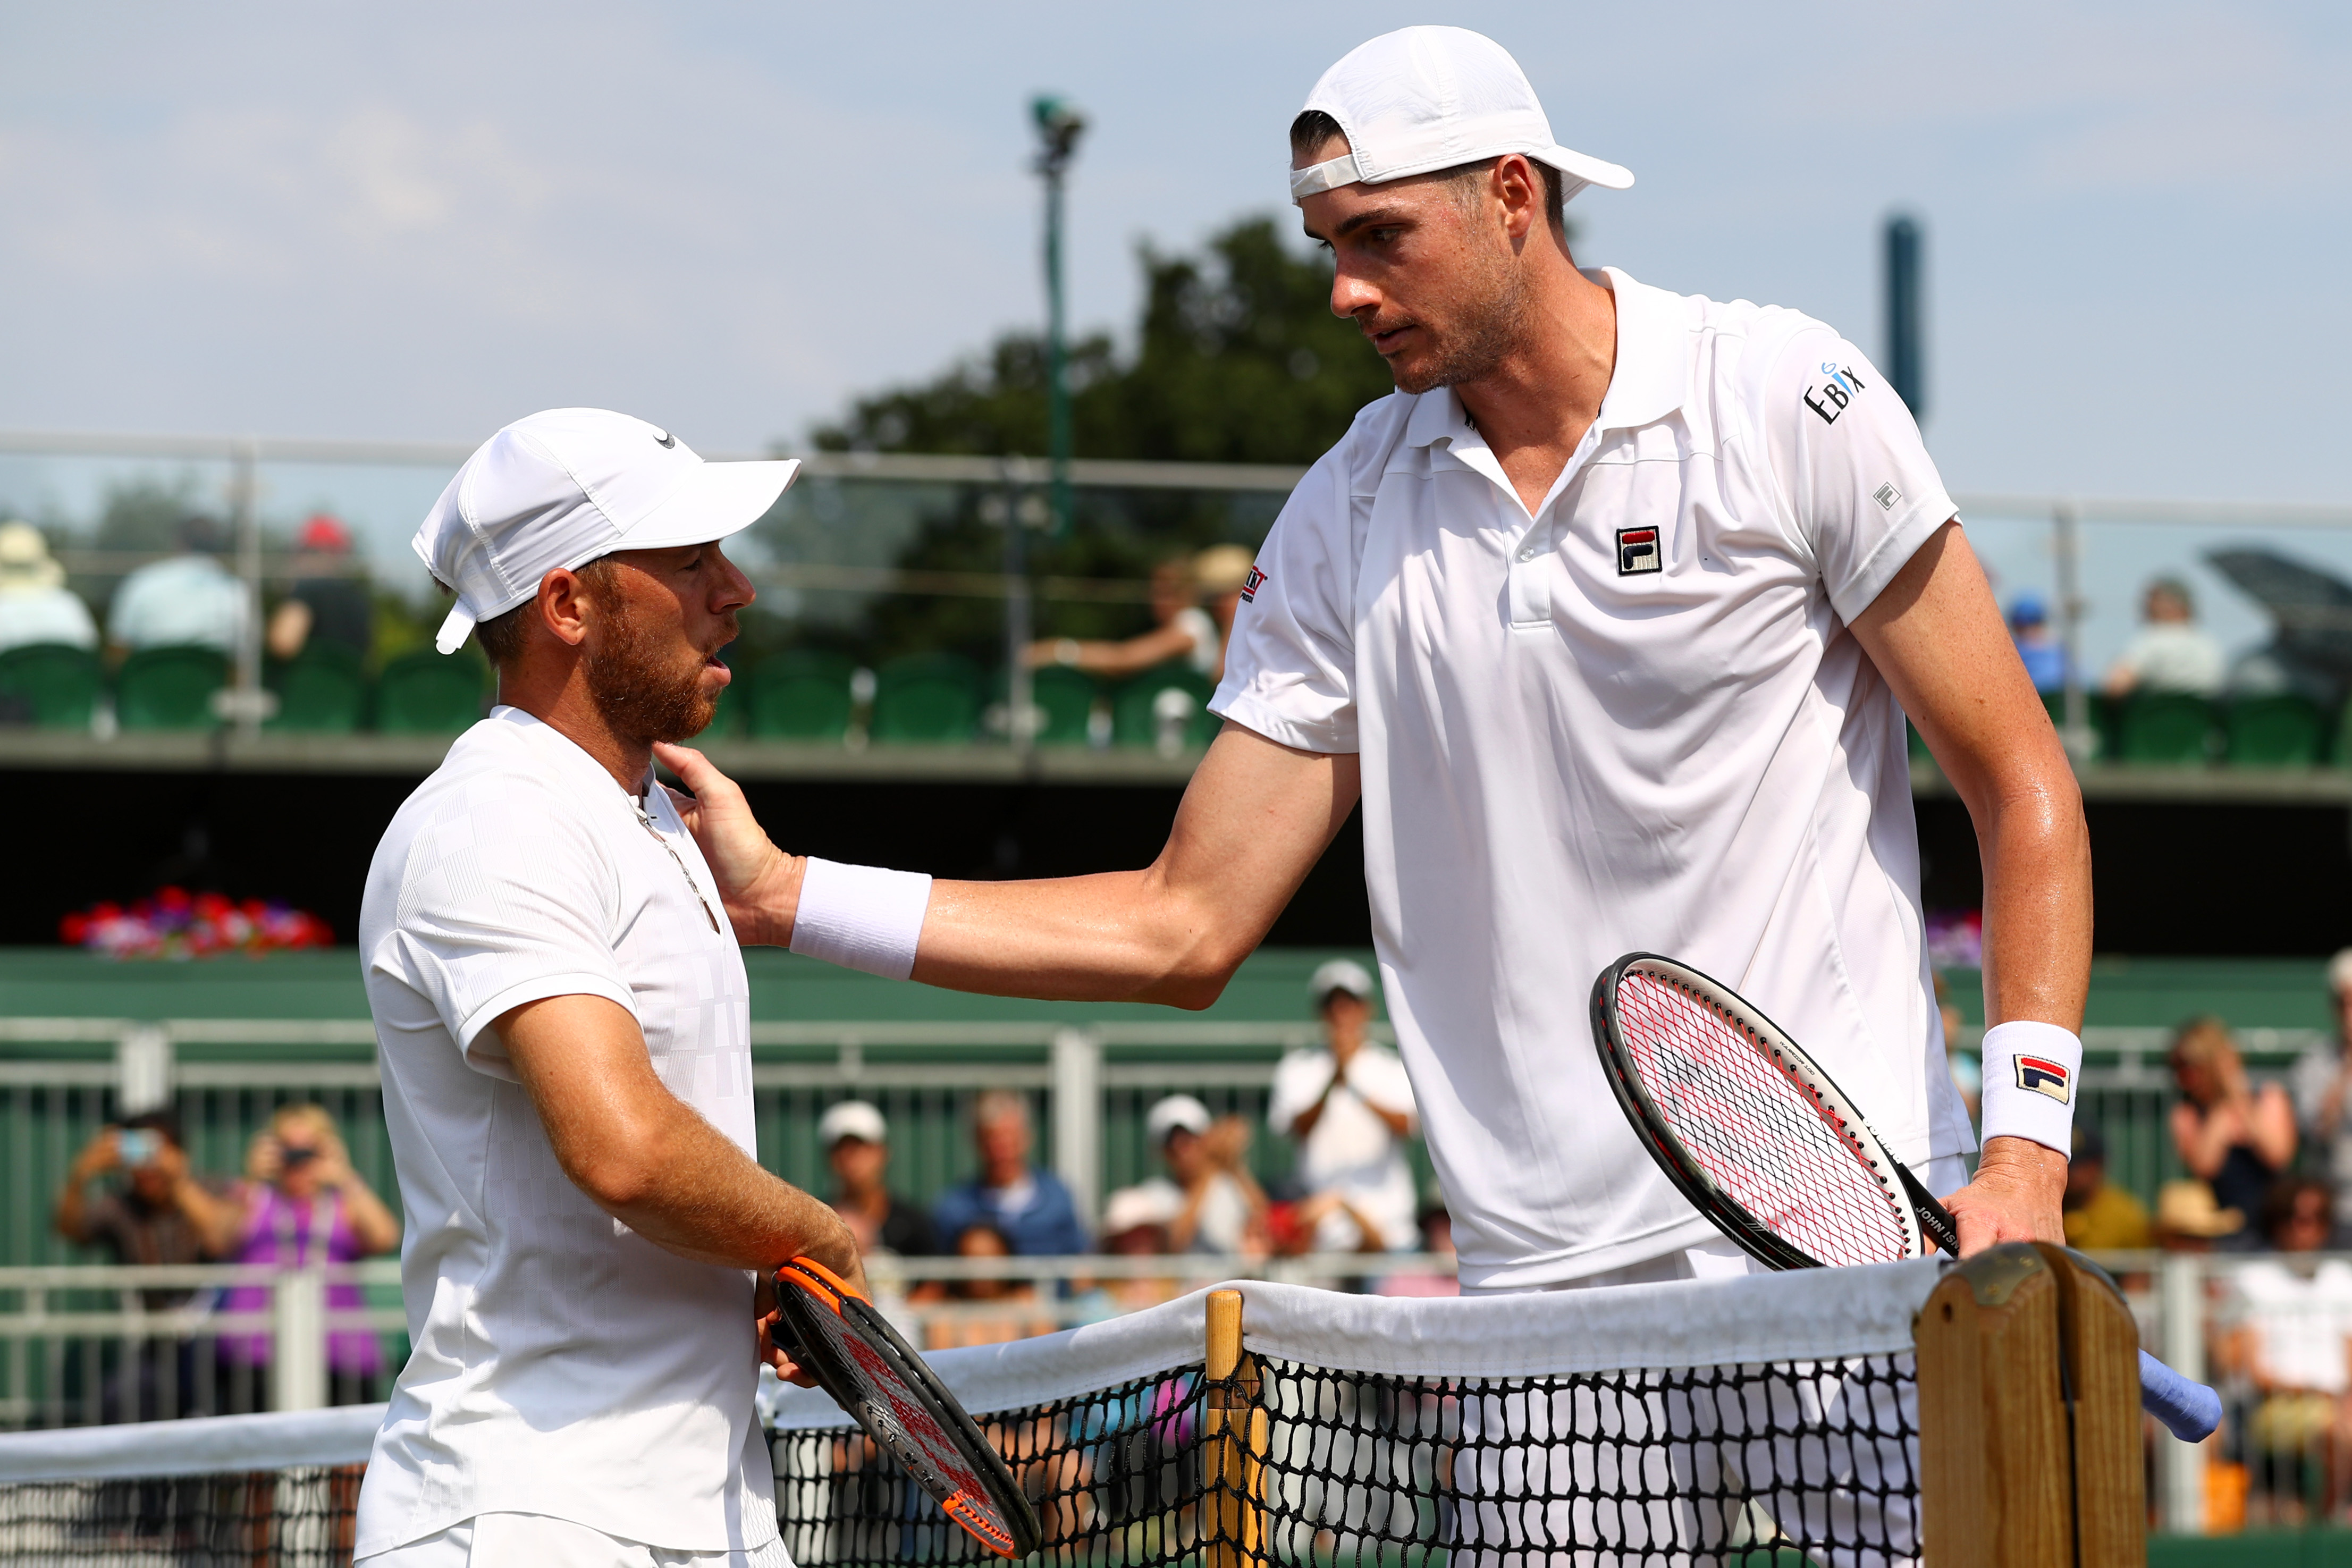 John Isner towers above 5-foot-9 opponent in hilarious Wimbledon photo |  For The Win